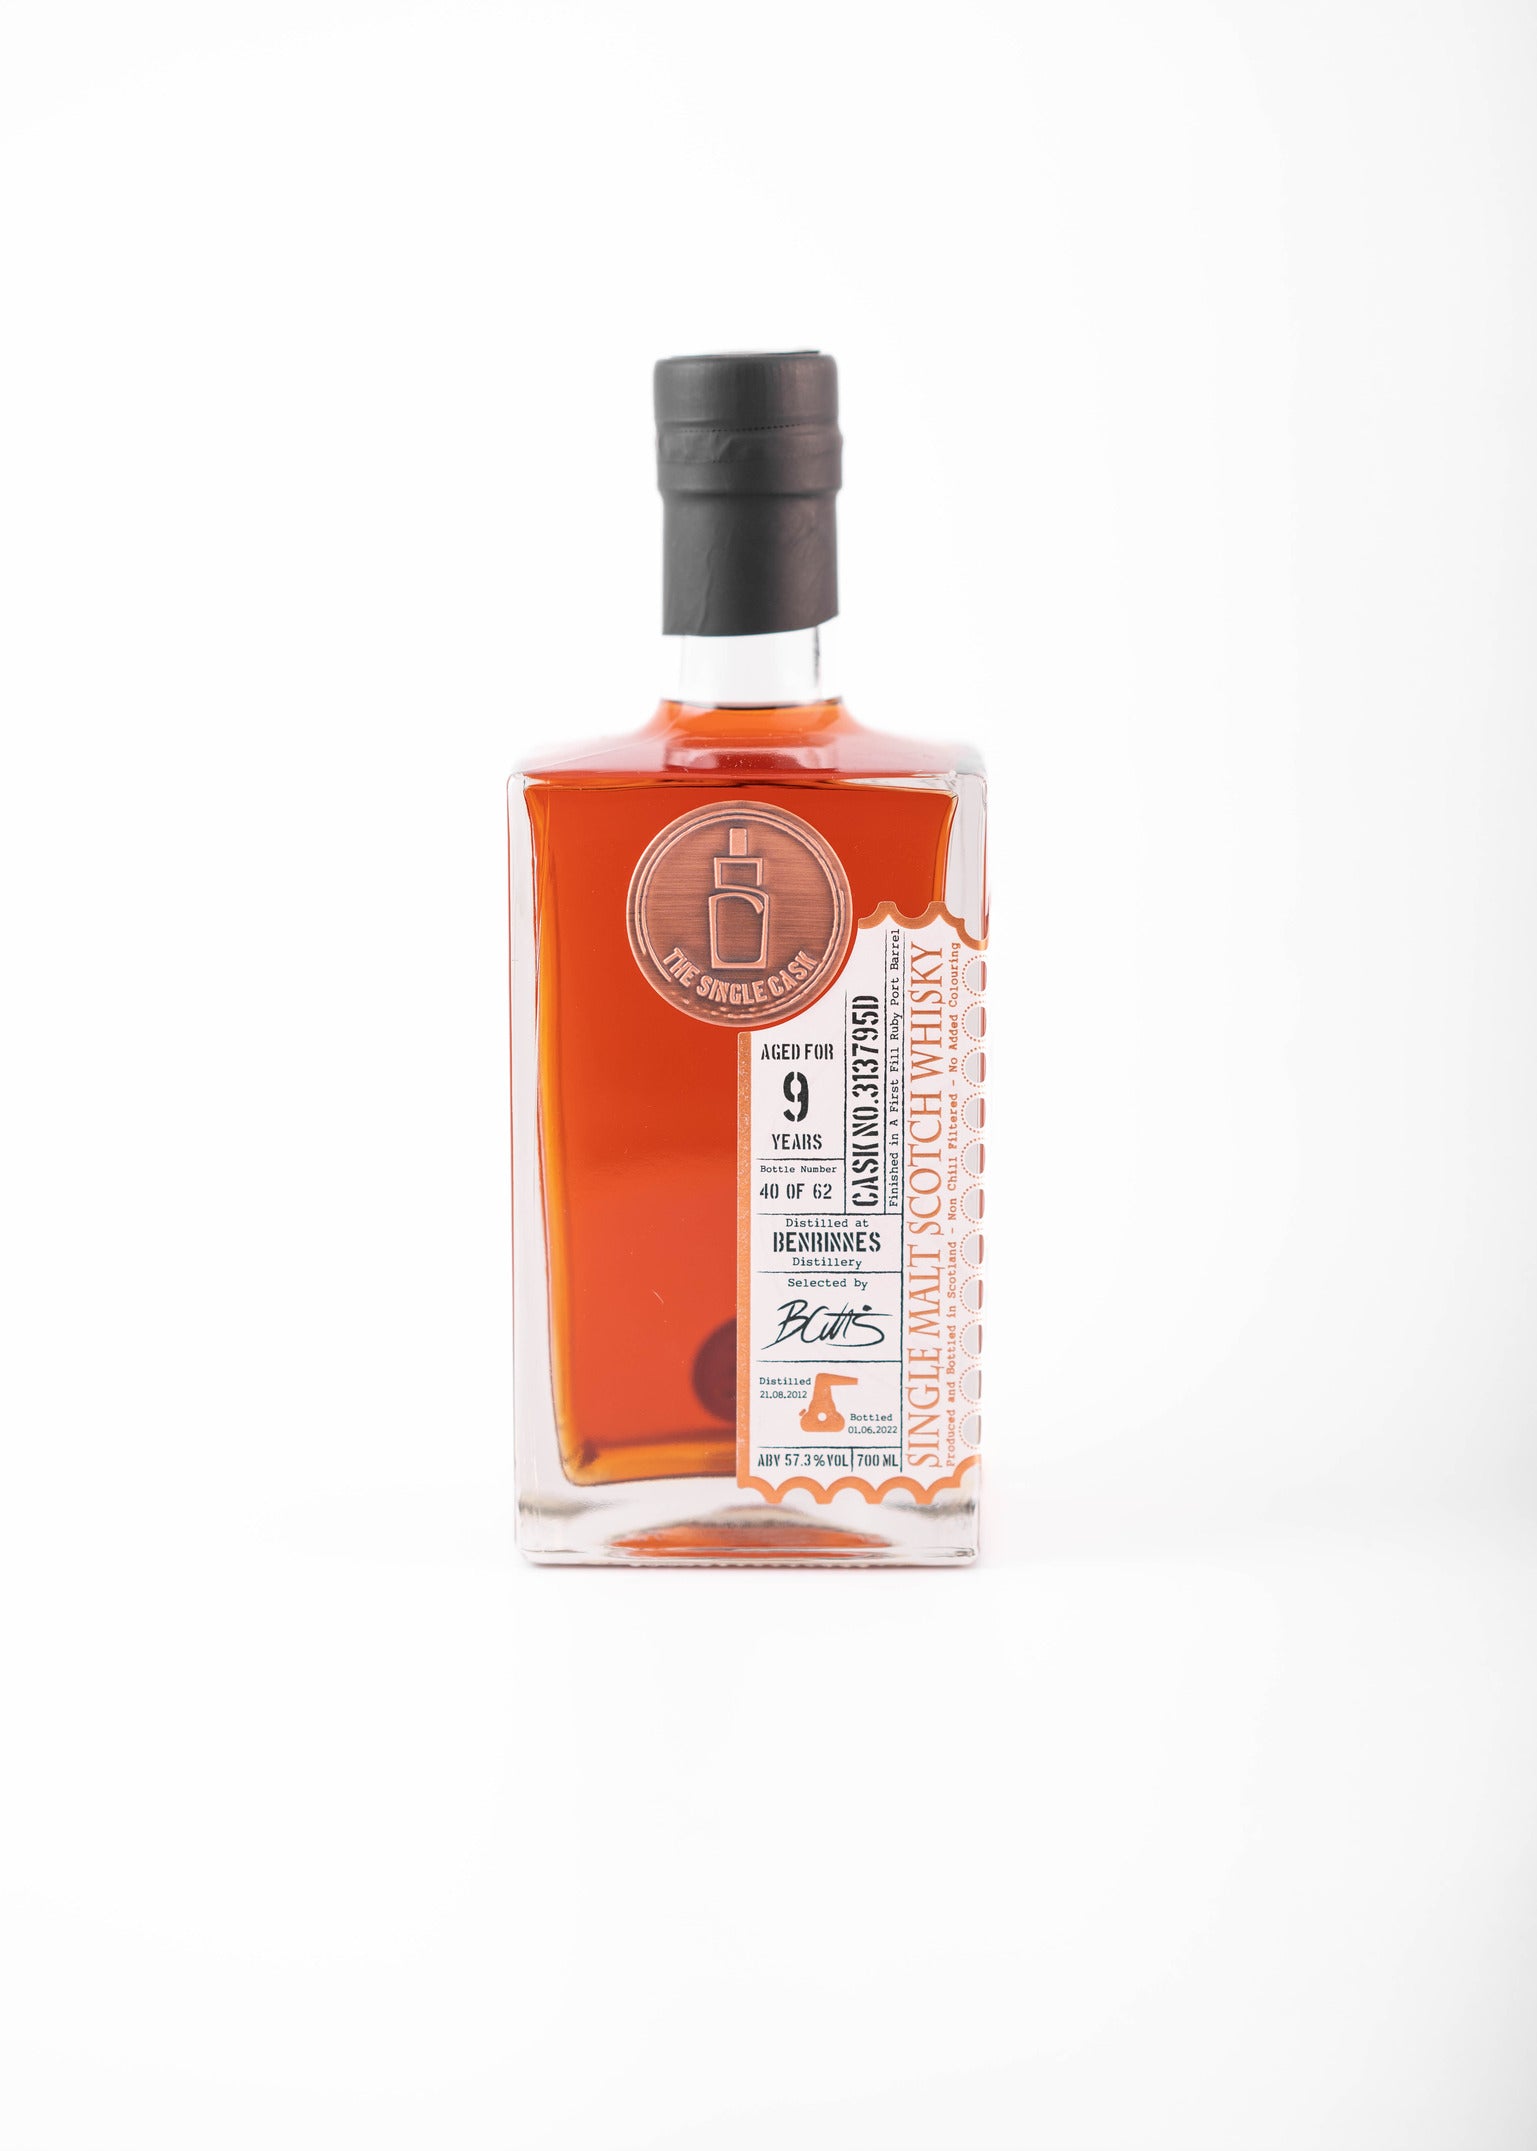 Benrinnes 9 years old single cask scotch whisky